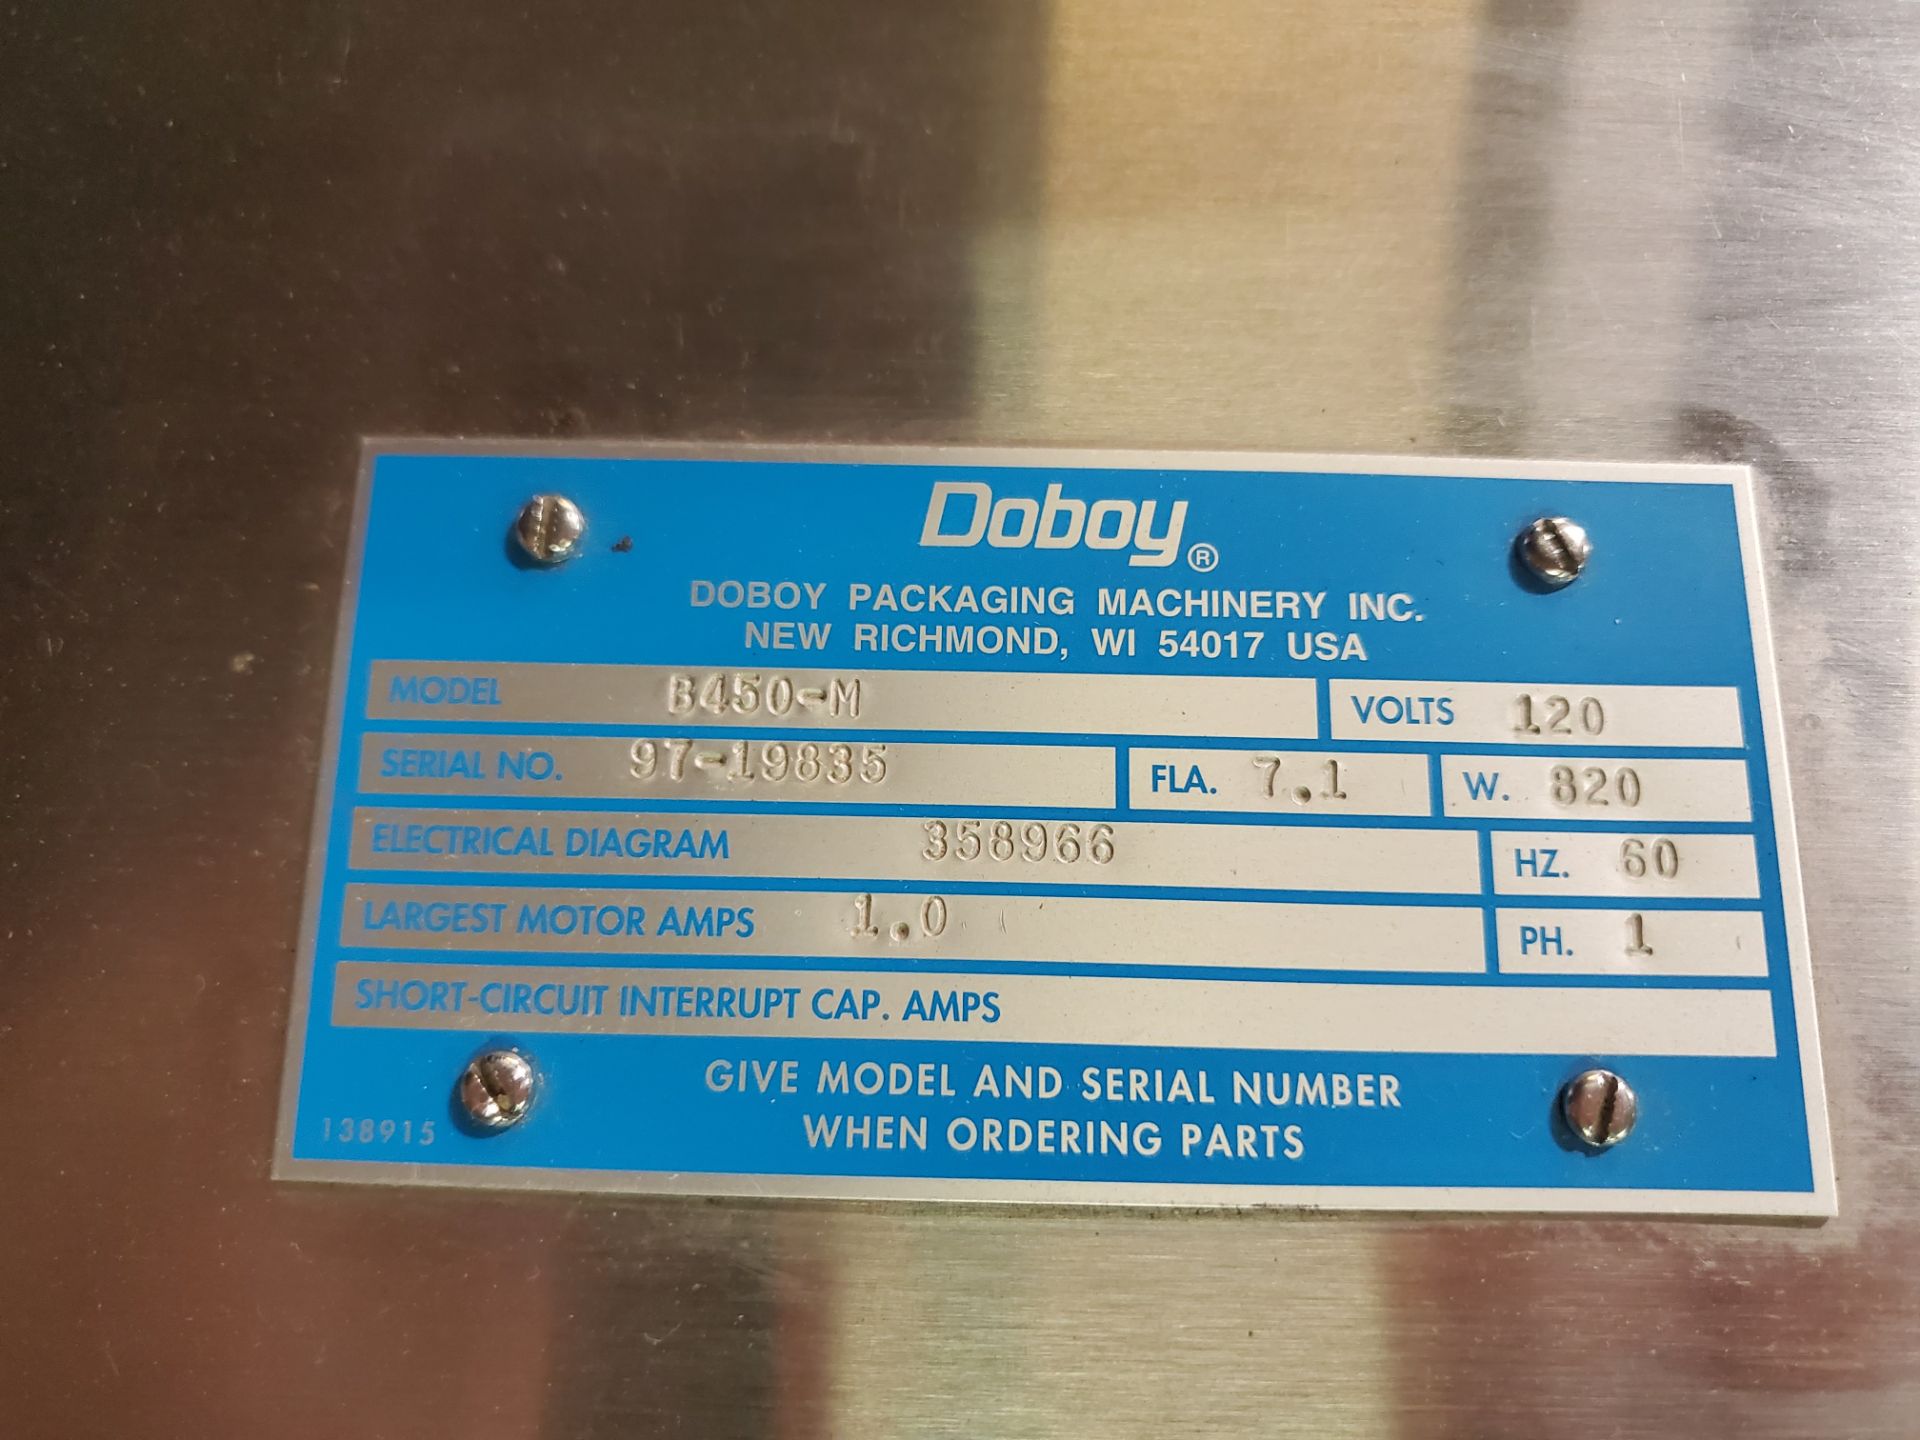 DOBOY Continuous Band Bag Sealer - Image 9 of 13